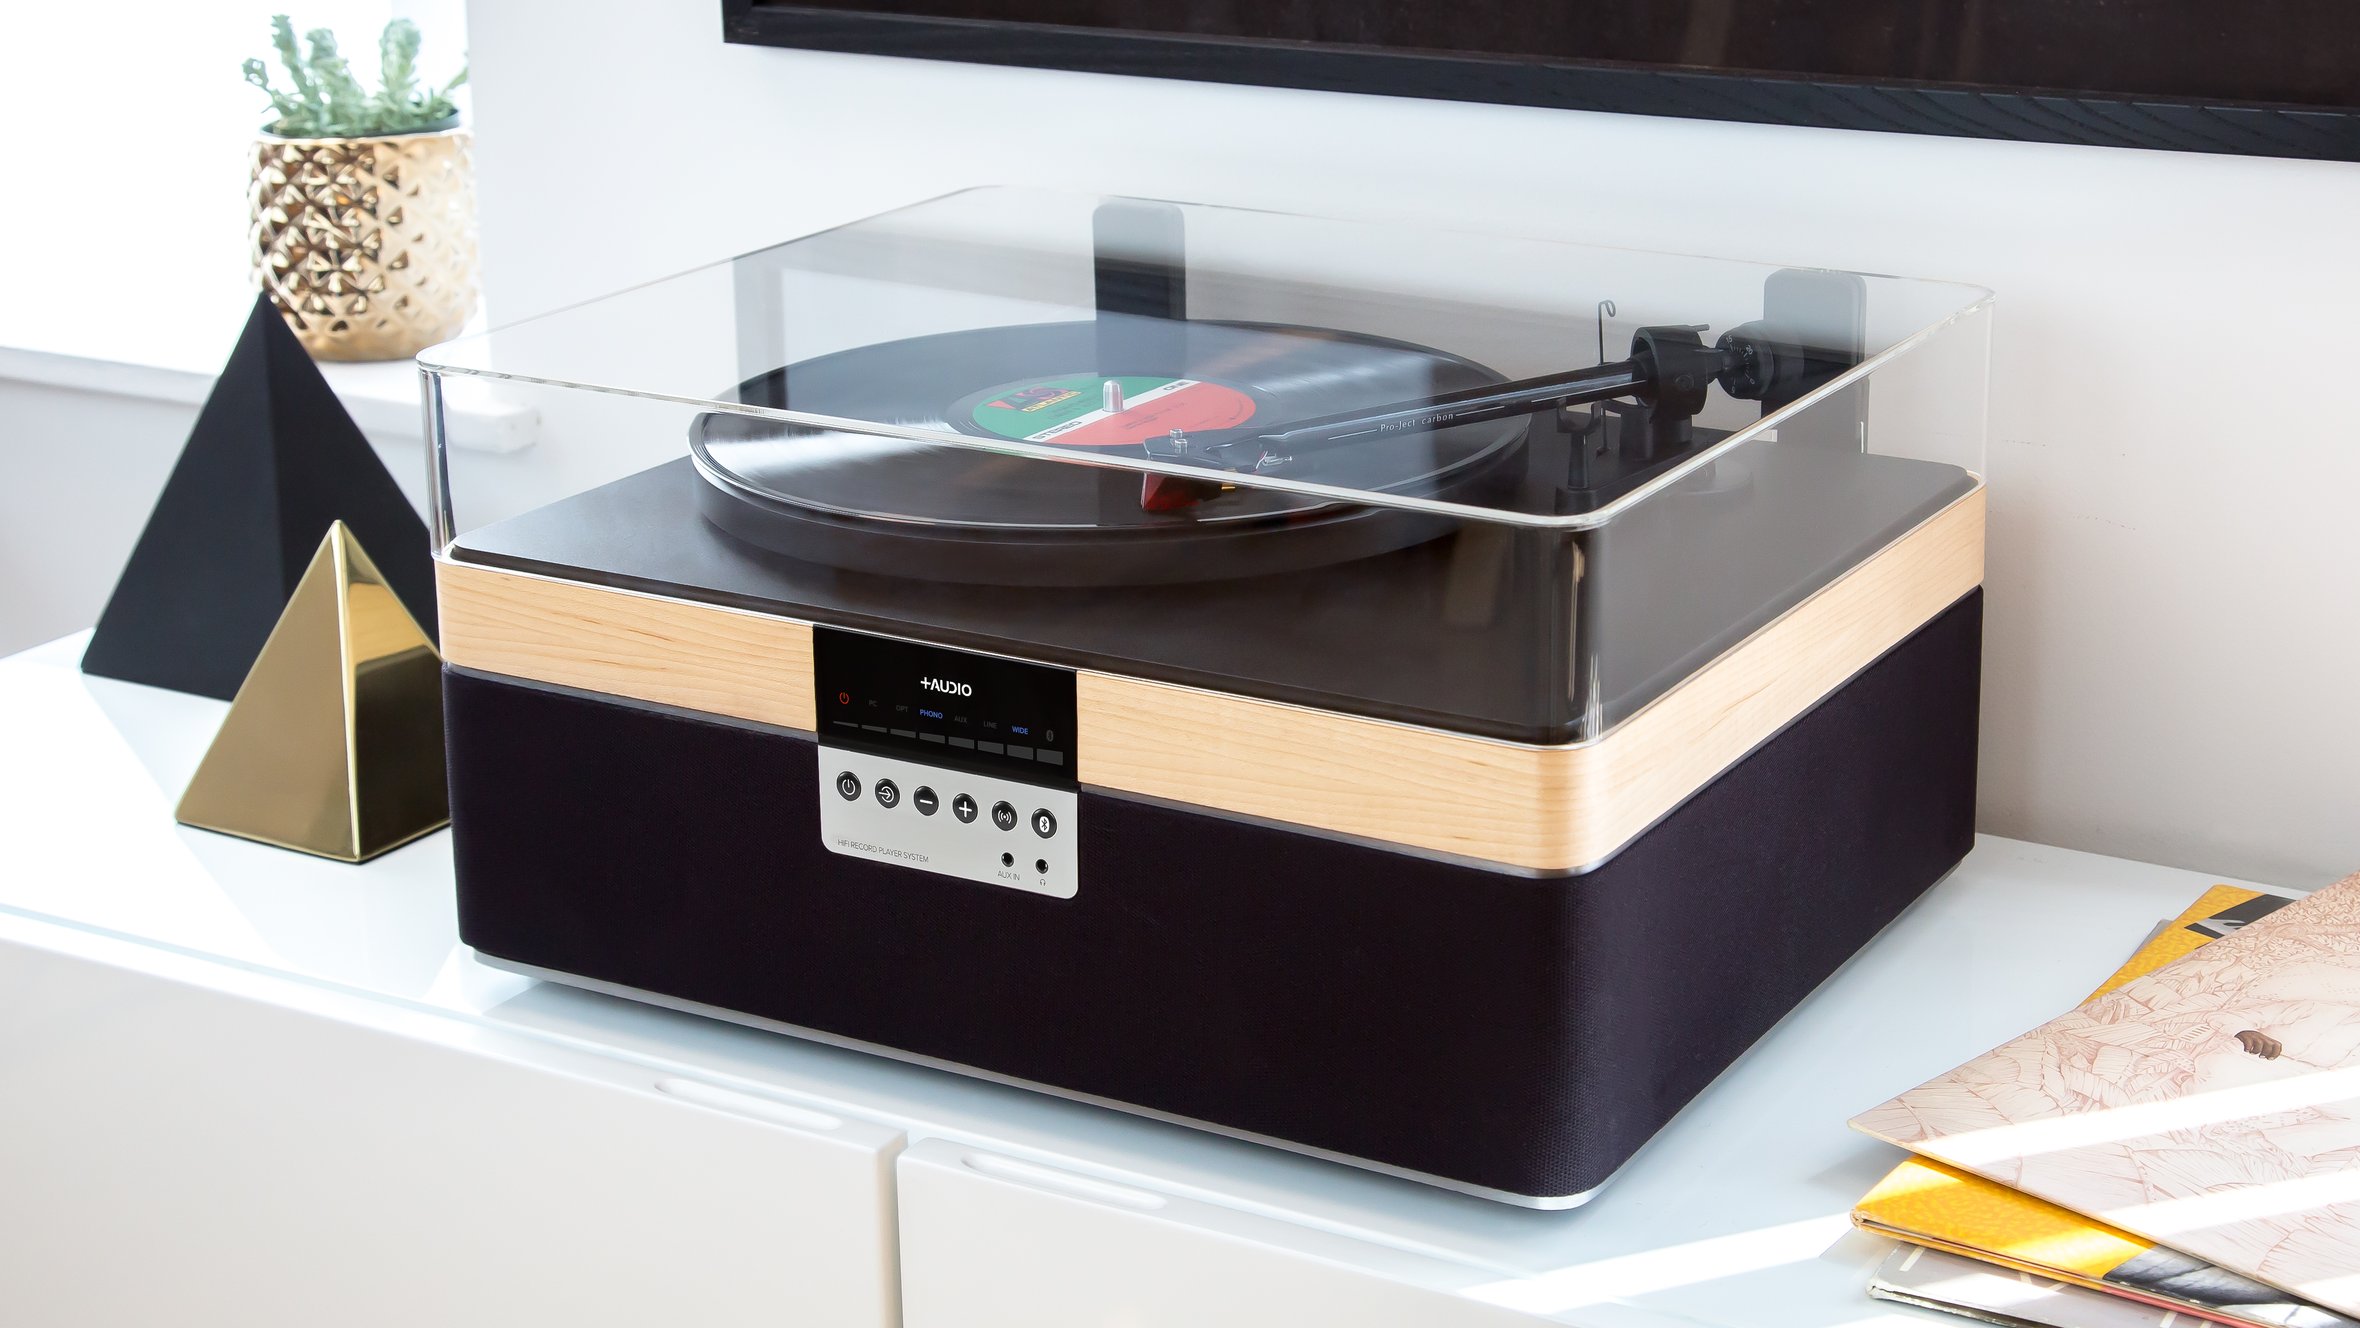 plusaudio therecord player turntable the record maple lifestyle 2 1180x 2x